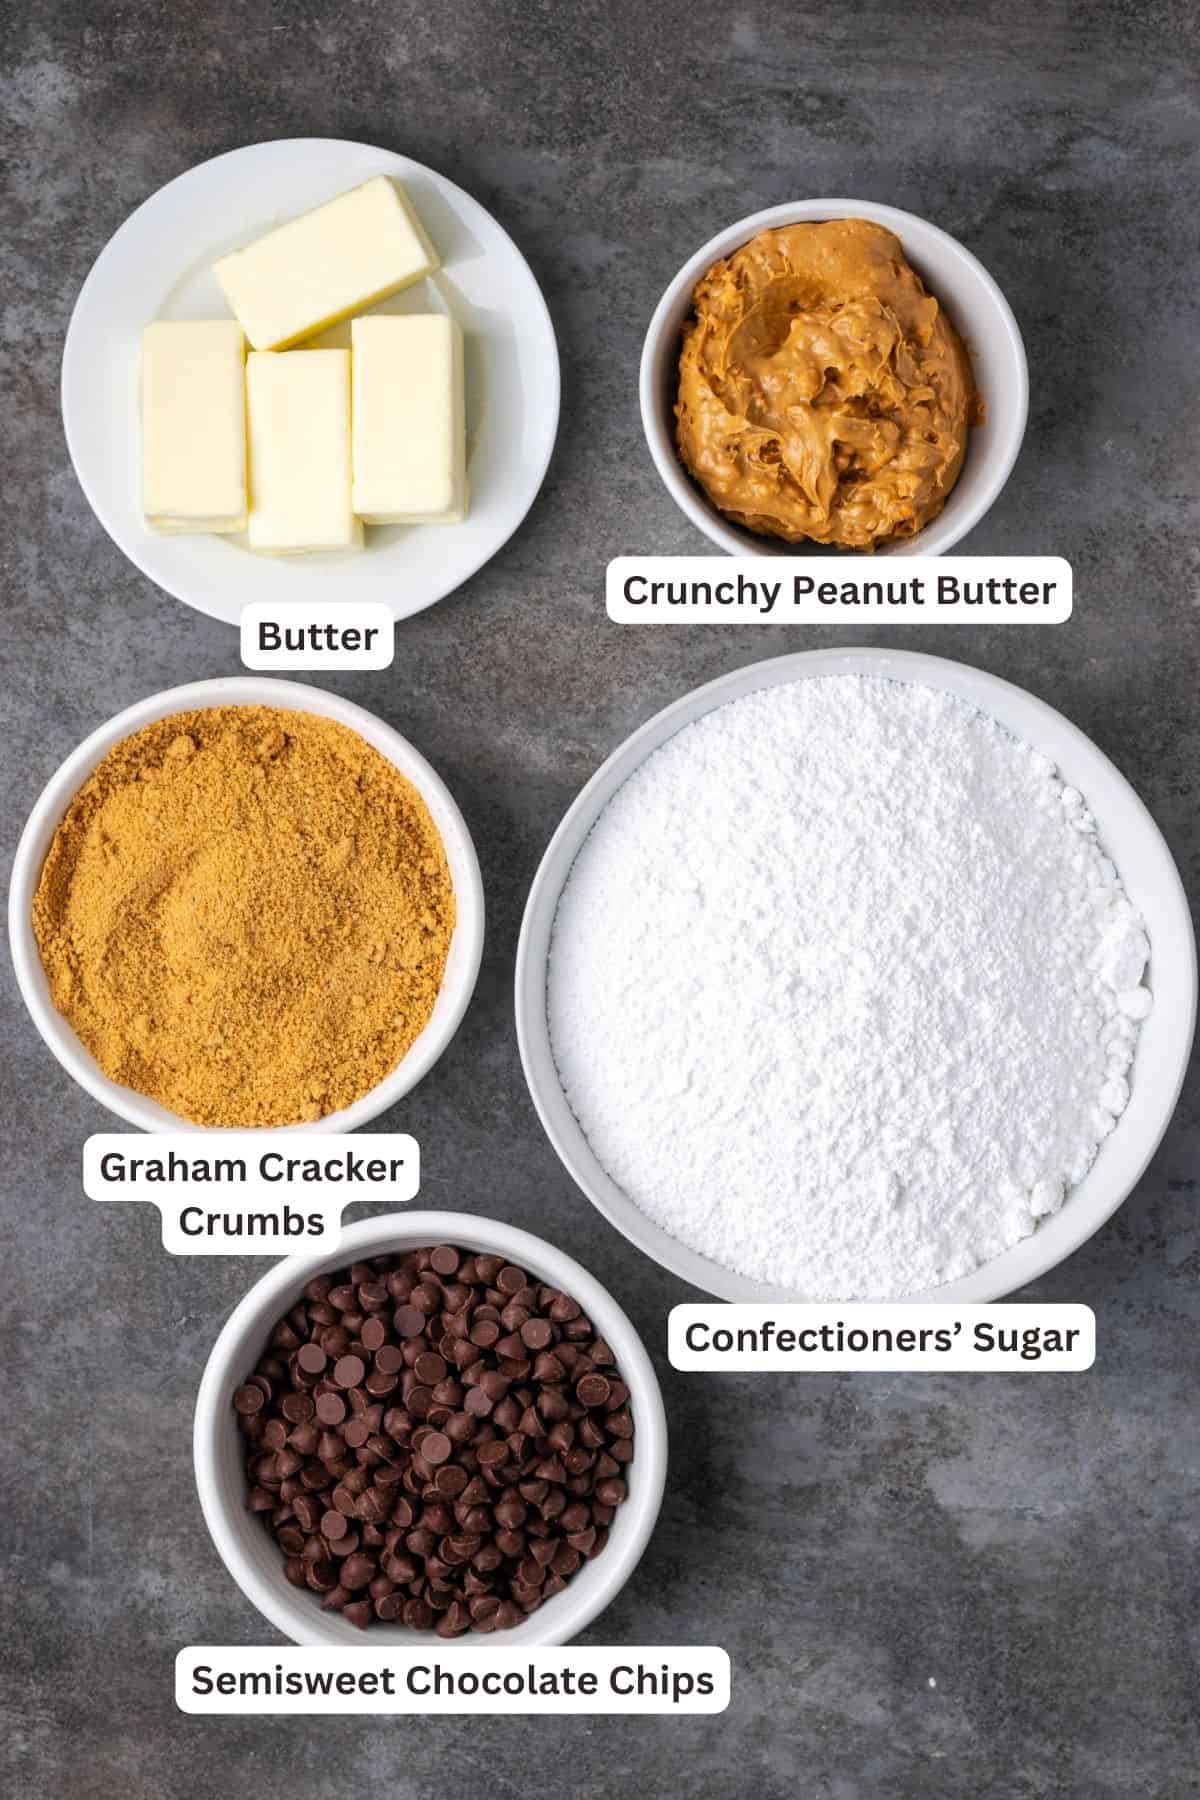 Ingredients for chocolate peanut butter bars with text labels overlaying each ingredient.